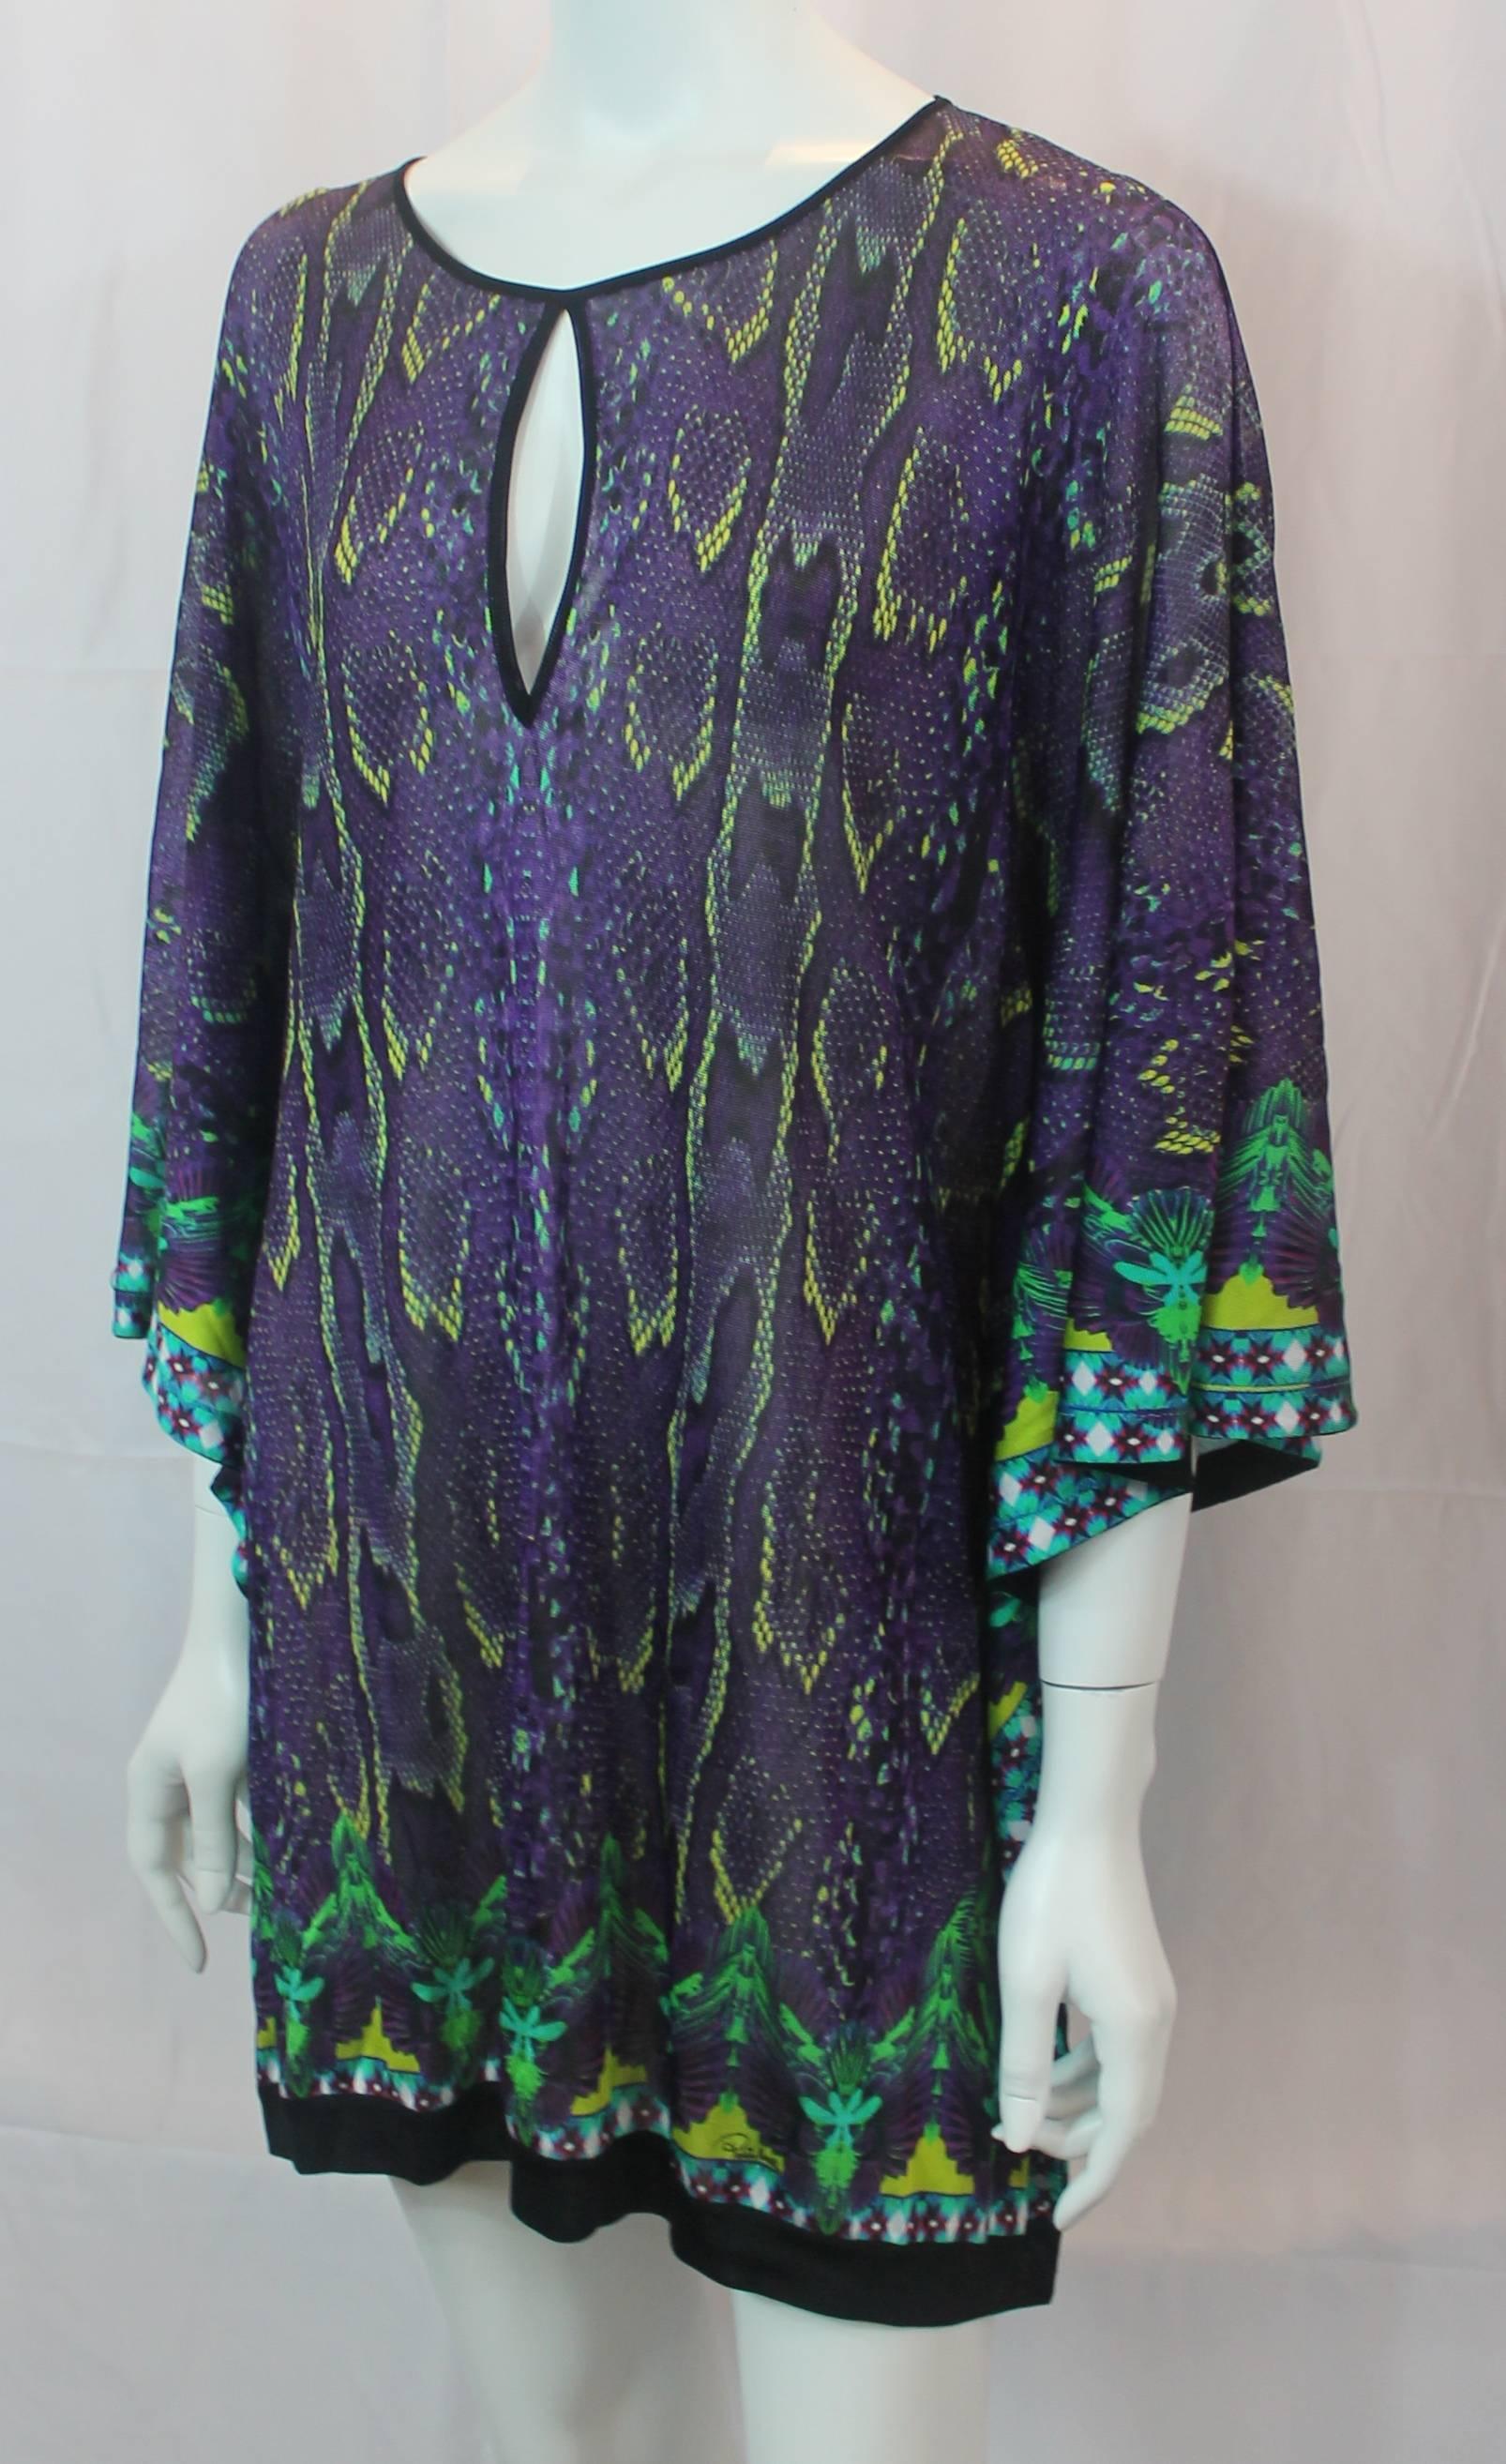 Roberto Cavalli Purple and Lime Snake Printed Knit Oversize Tunic Top - M. This tunic top has a purple and lime snake skin print, a keyhole and side slits, and belt loops. It is in excellent condition but comes with no belt.

Measurements:
Bust: